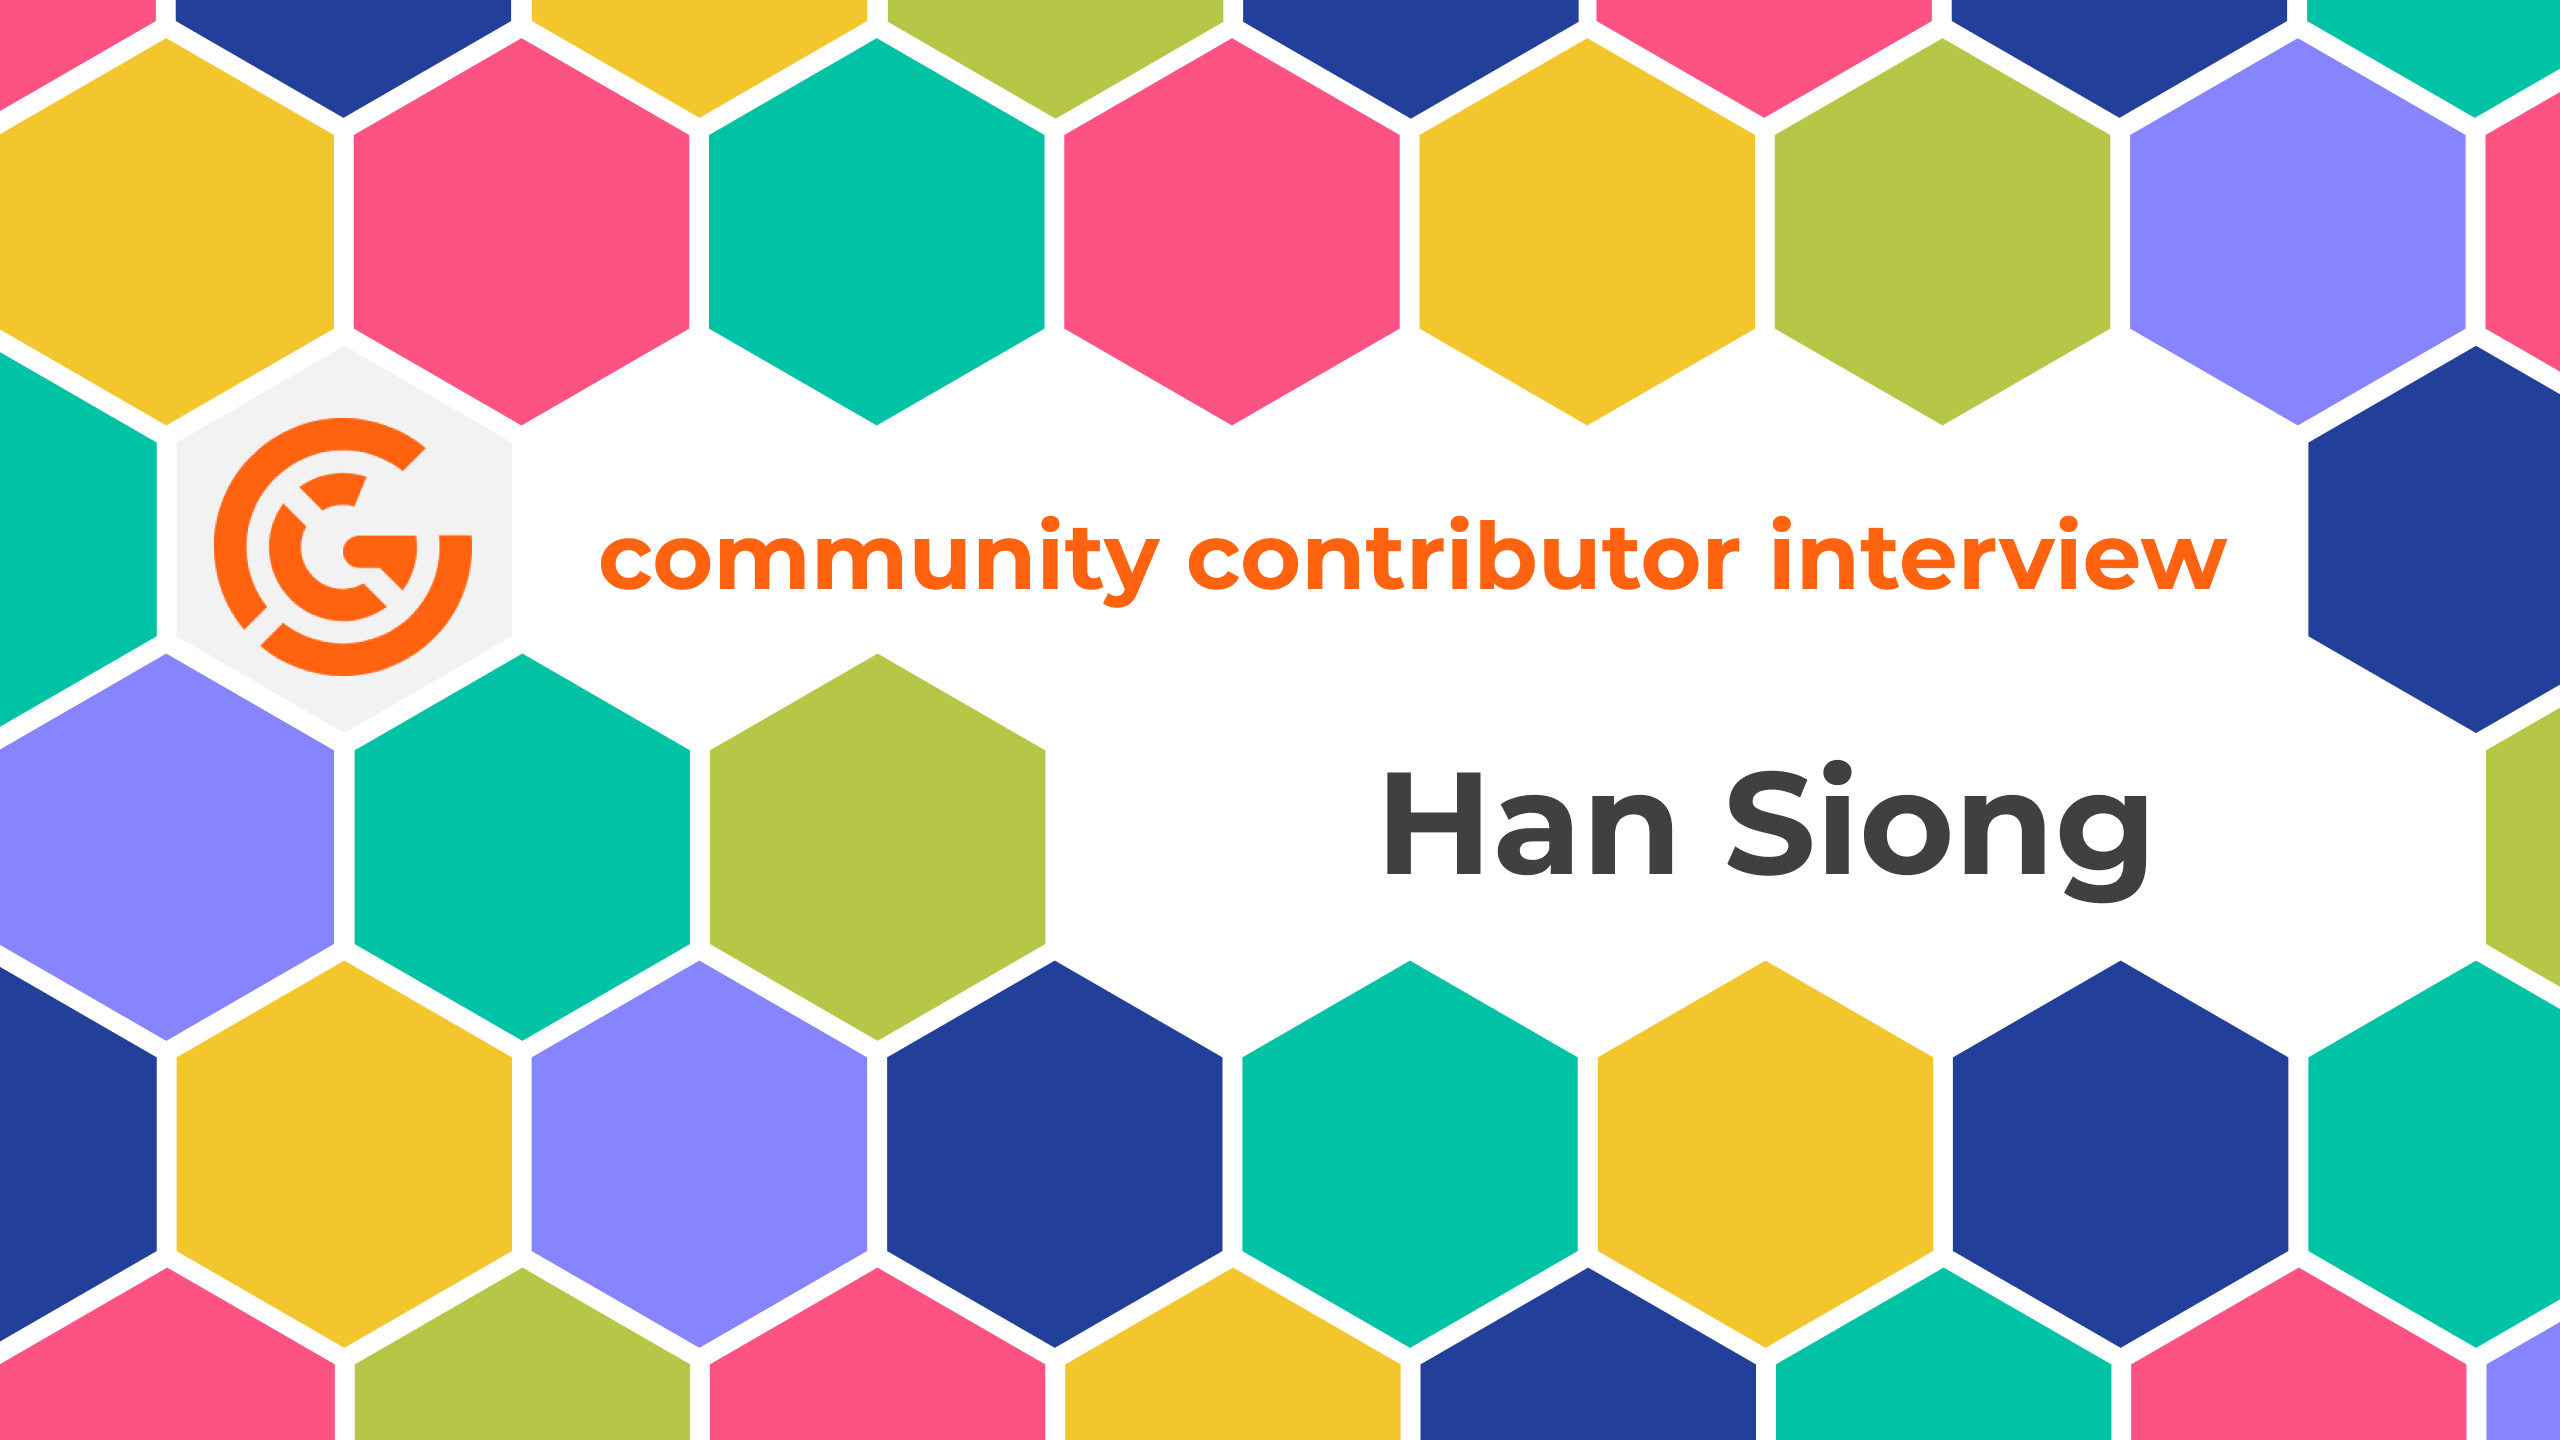 Community contributor interview cover card for Han Siong